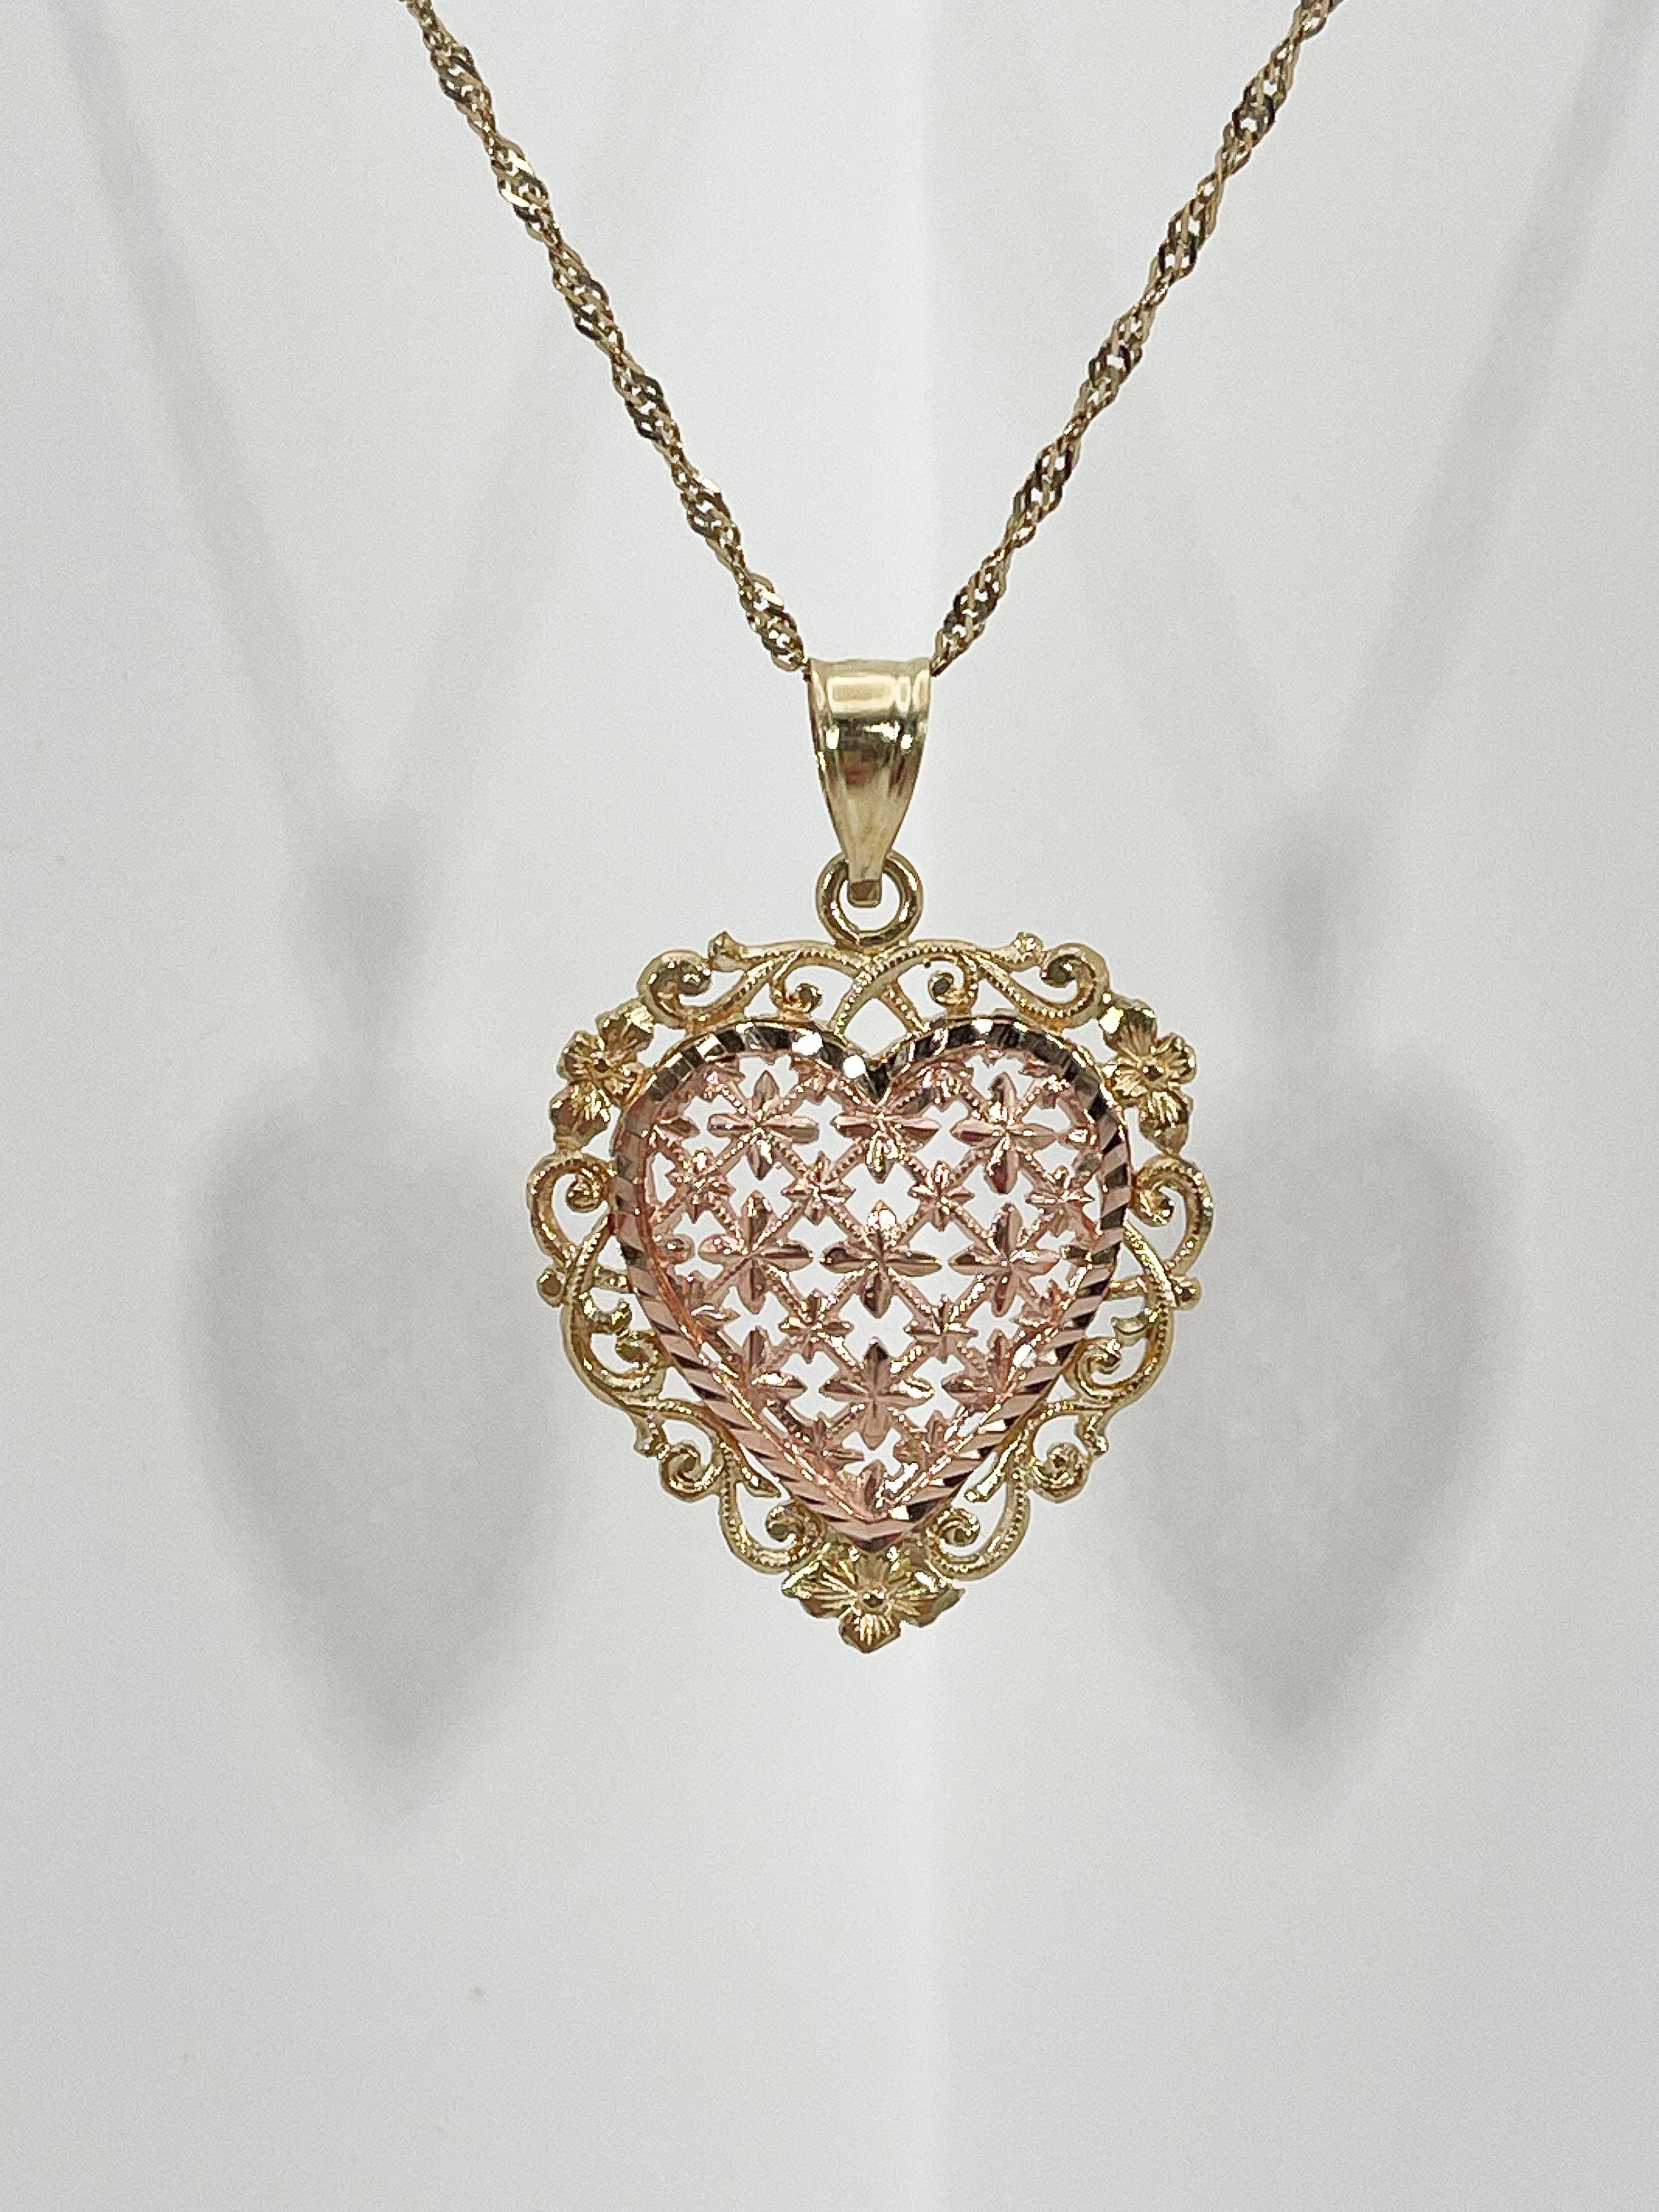 14K Rose and Yellow Gold Filigree Heart Pendant Necklace In Excellent Condition For Sale In Stuart, FL